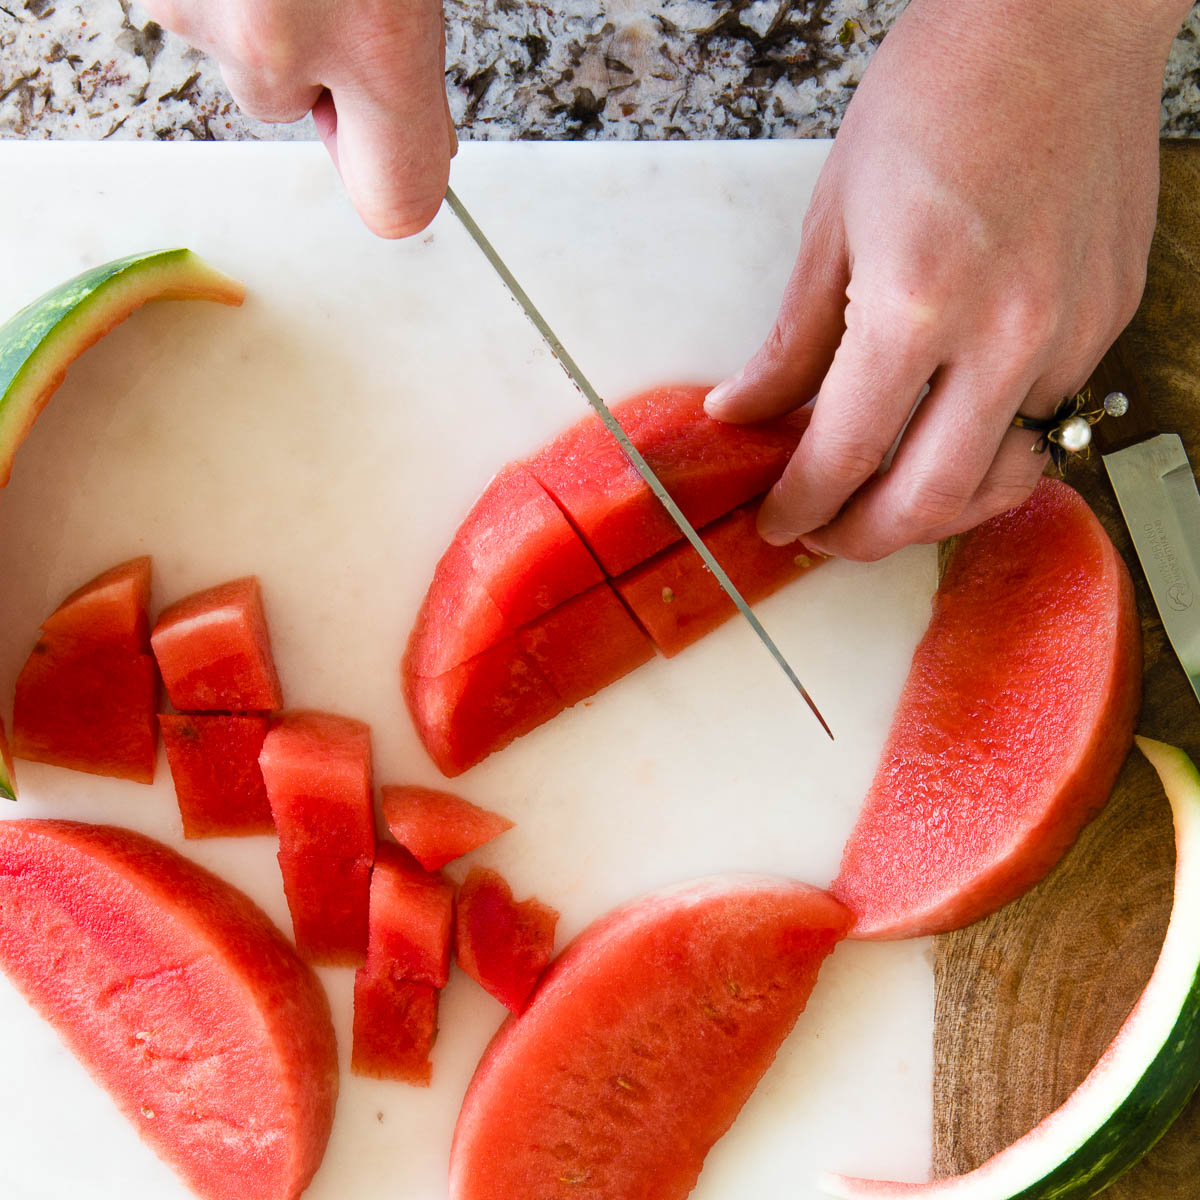 showing how to cut a melon by taking watermelon wedges into cubed pieces.